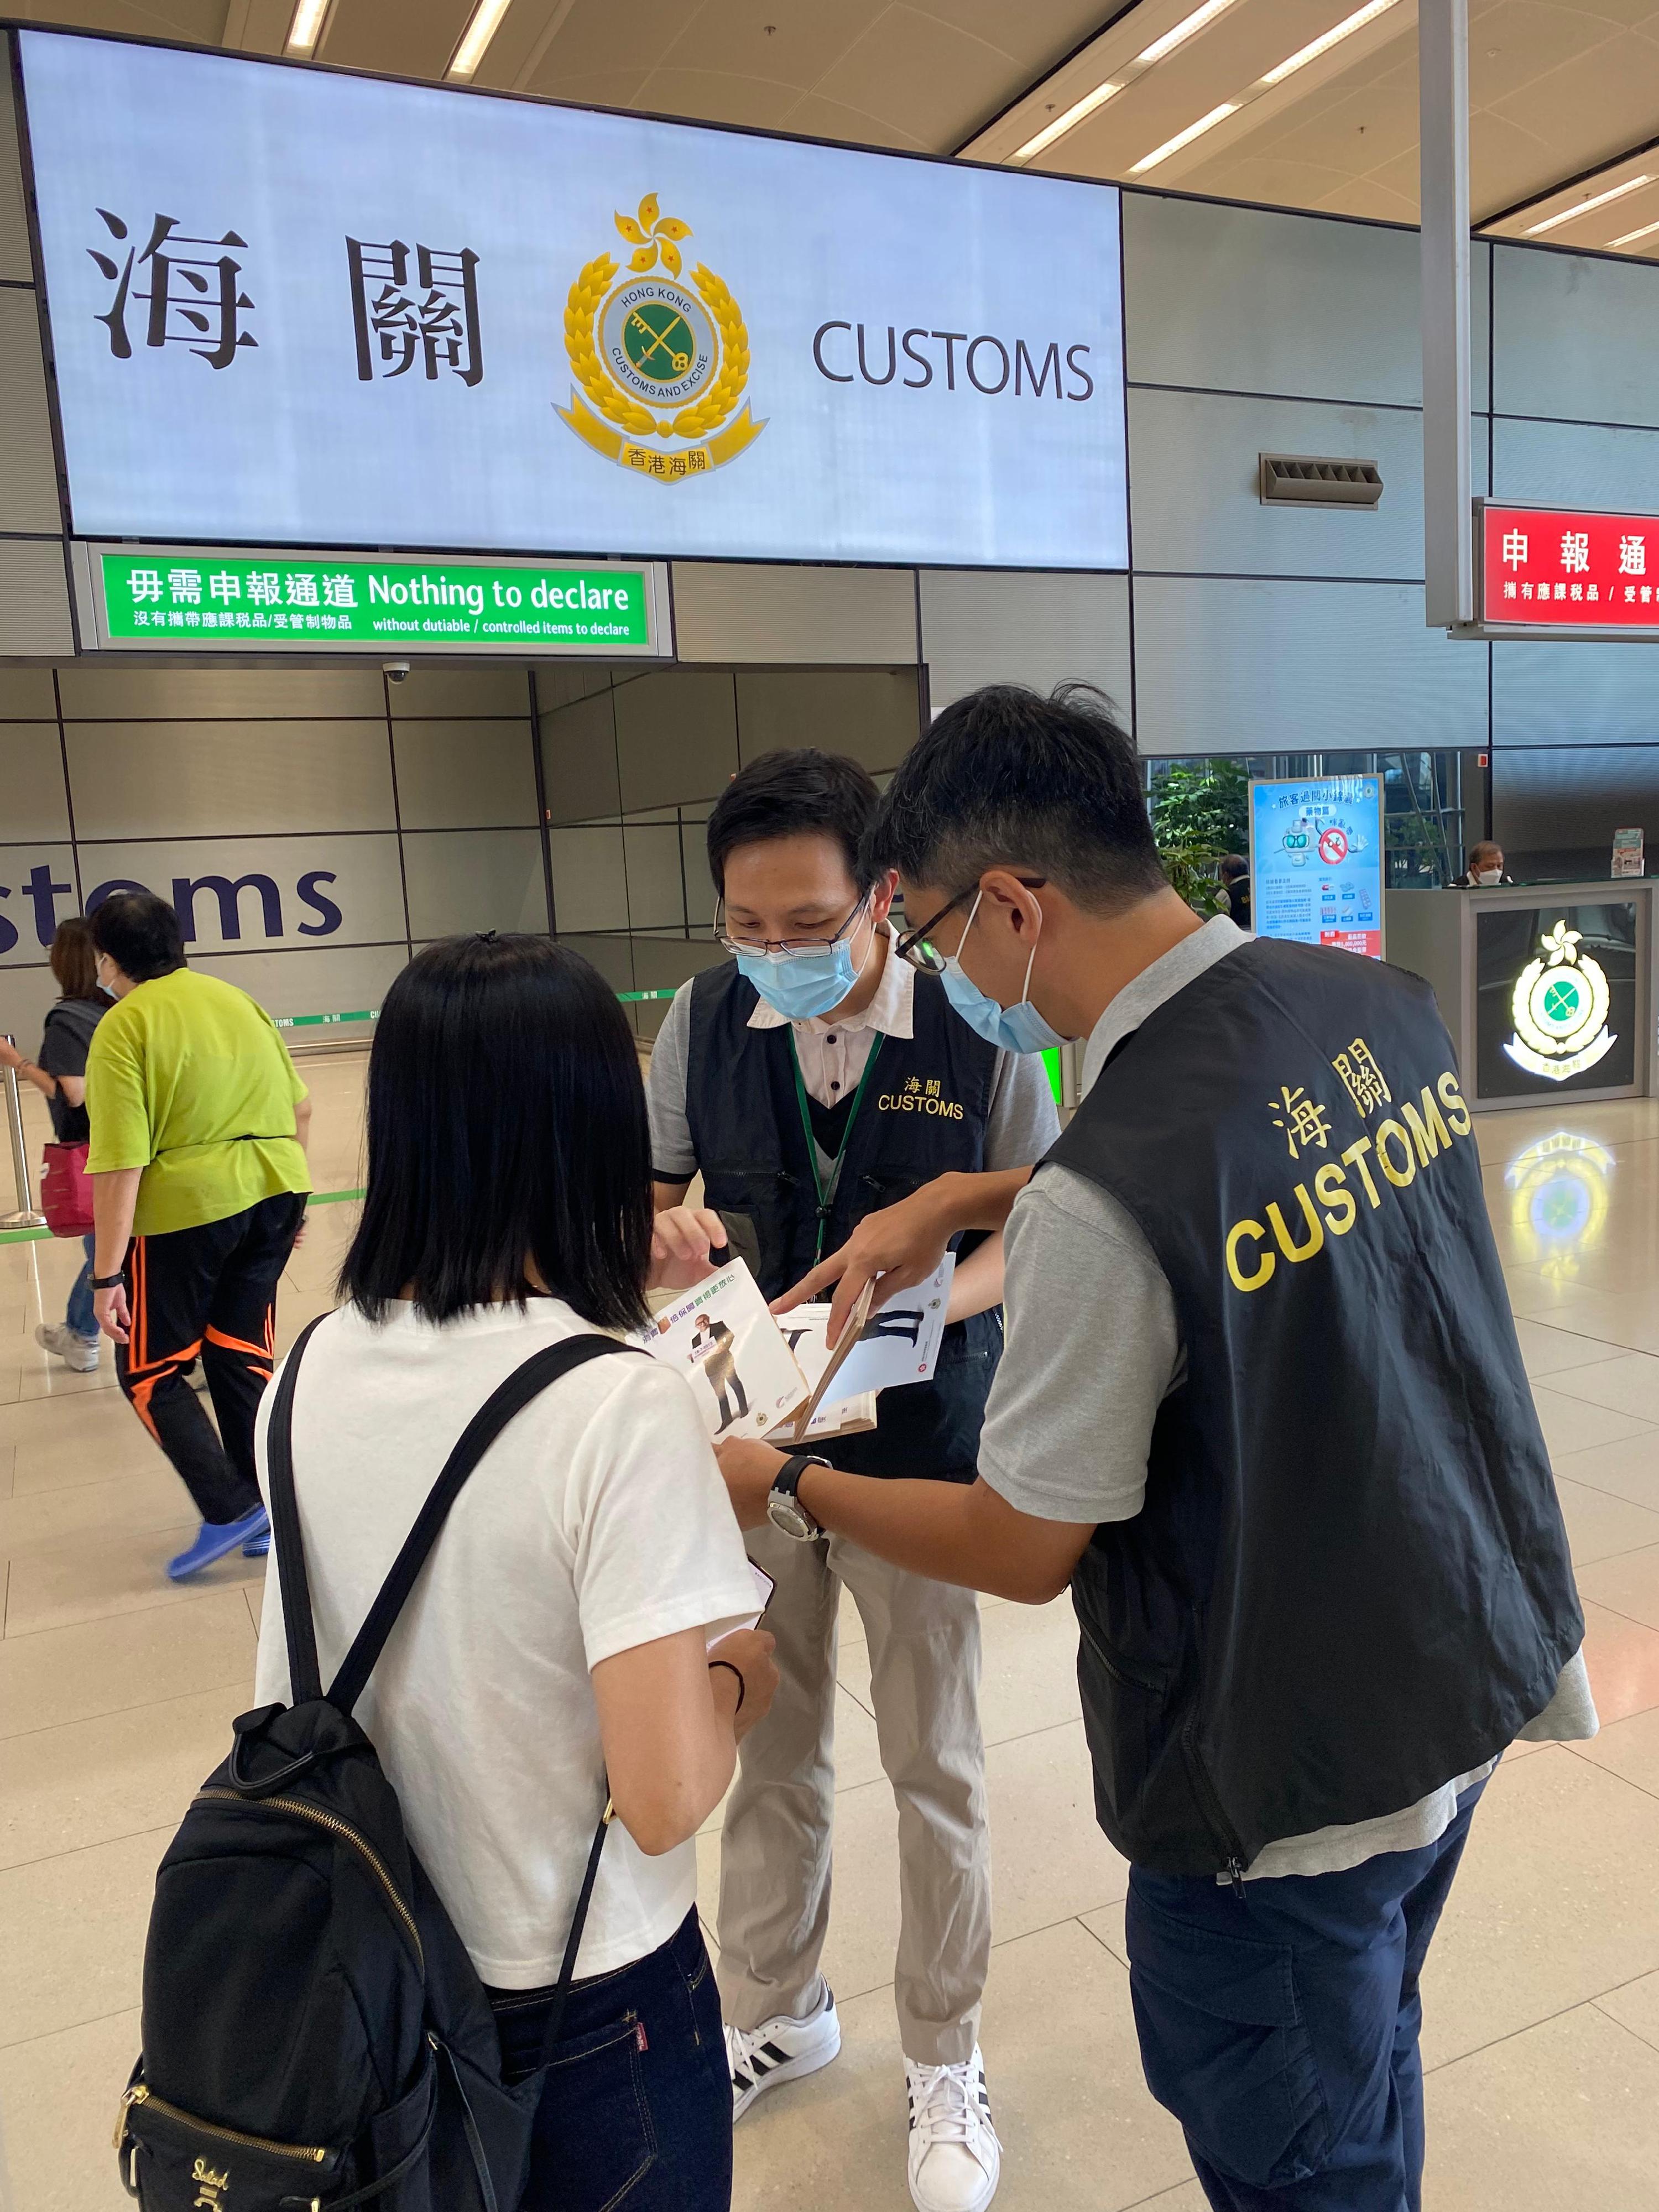 Hong Kong Customs launched an operation today (September 28) to step up patrols during the National Day Golden Week period at popular shopping spots in various districts and to remind traders to comply with the requirements of the Trade Descriptions Ordinance, with a view to safeguarding rights of local consumers and visitors. Photo shows Customs officers distributing pamphlets at the Hong Kong-Zhuhai-Macao Bridge Hong Kong Port.

